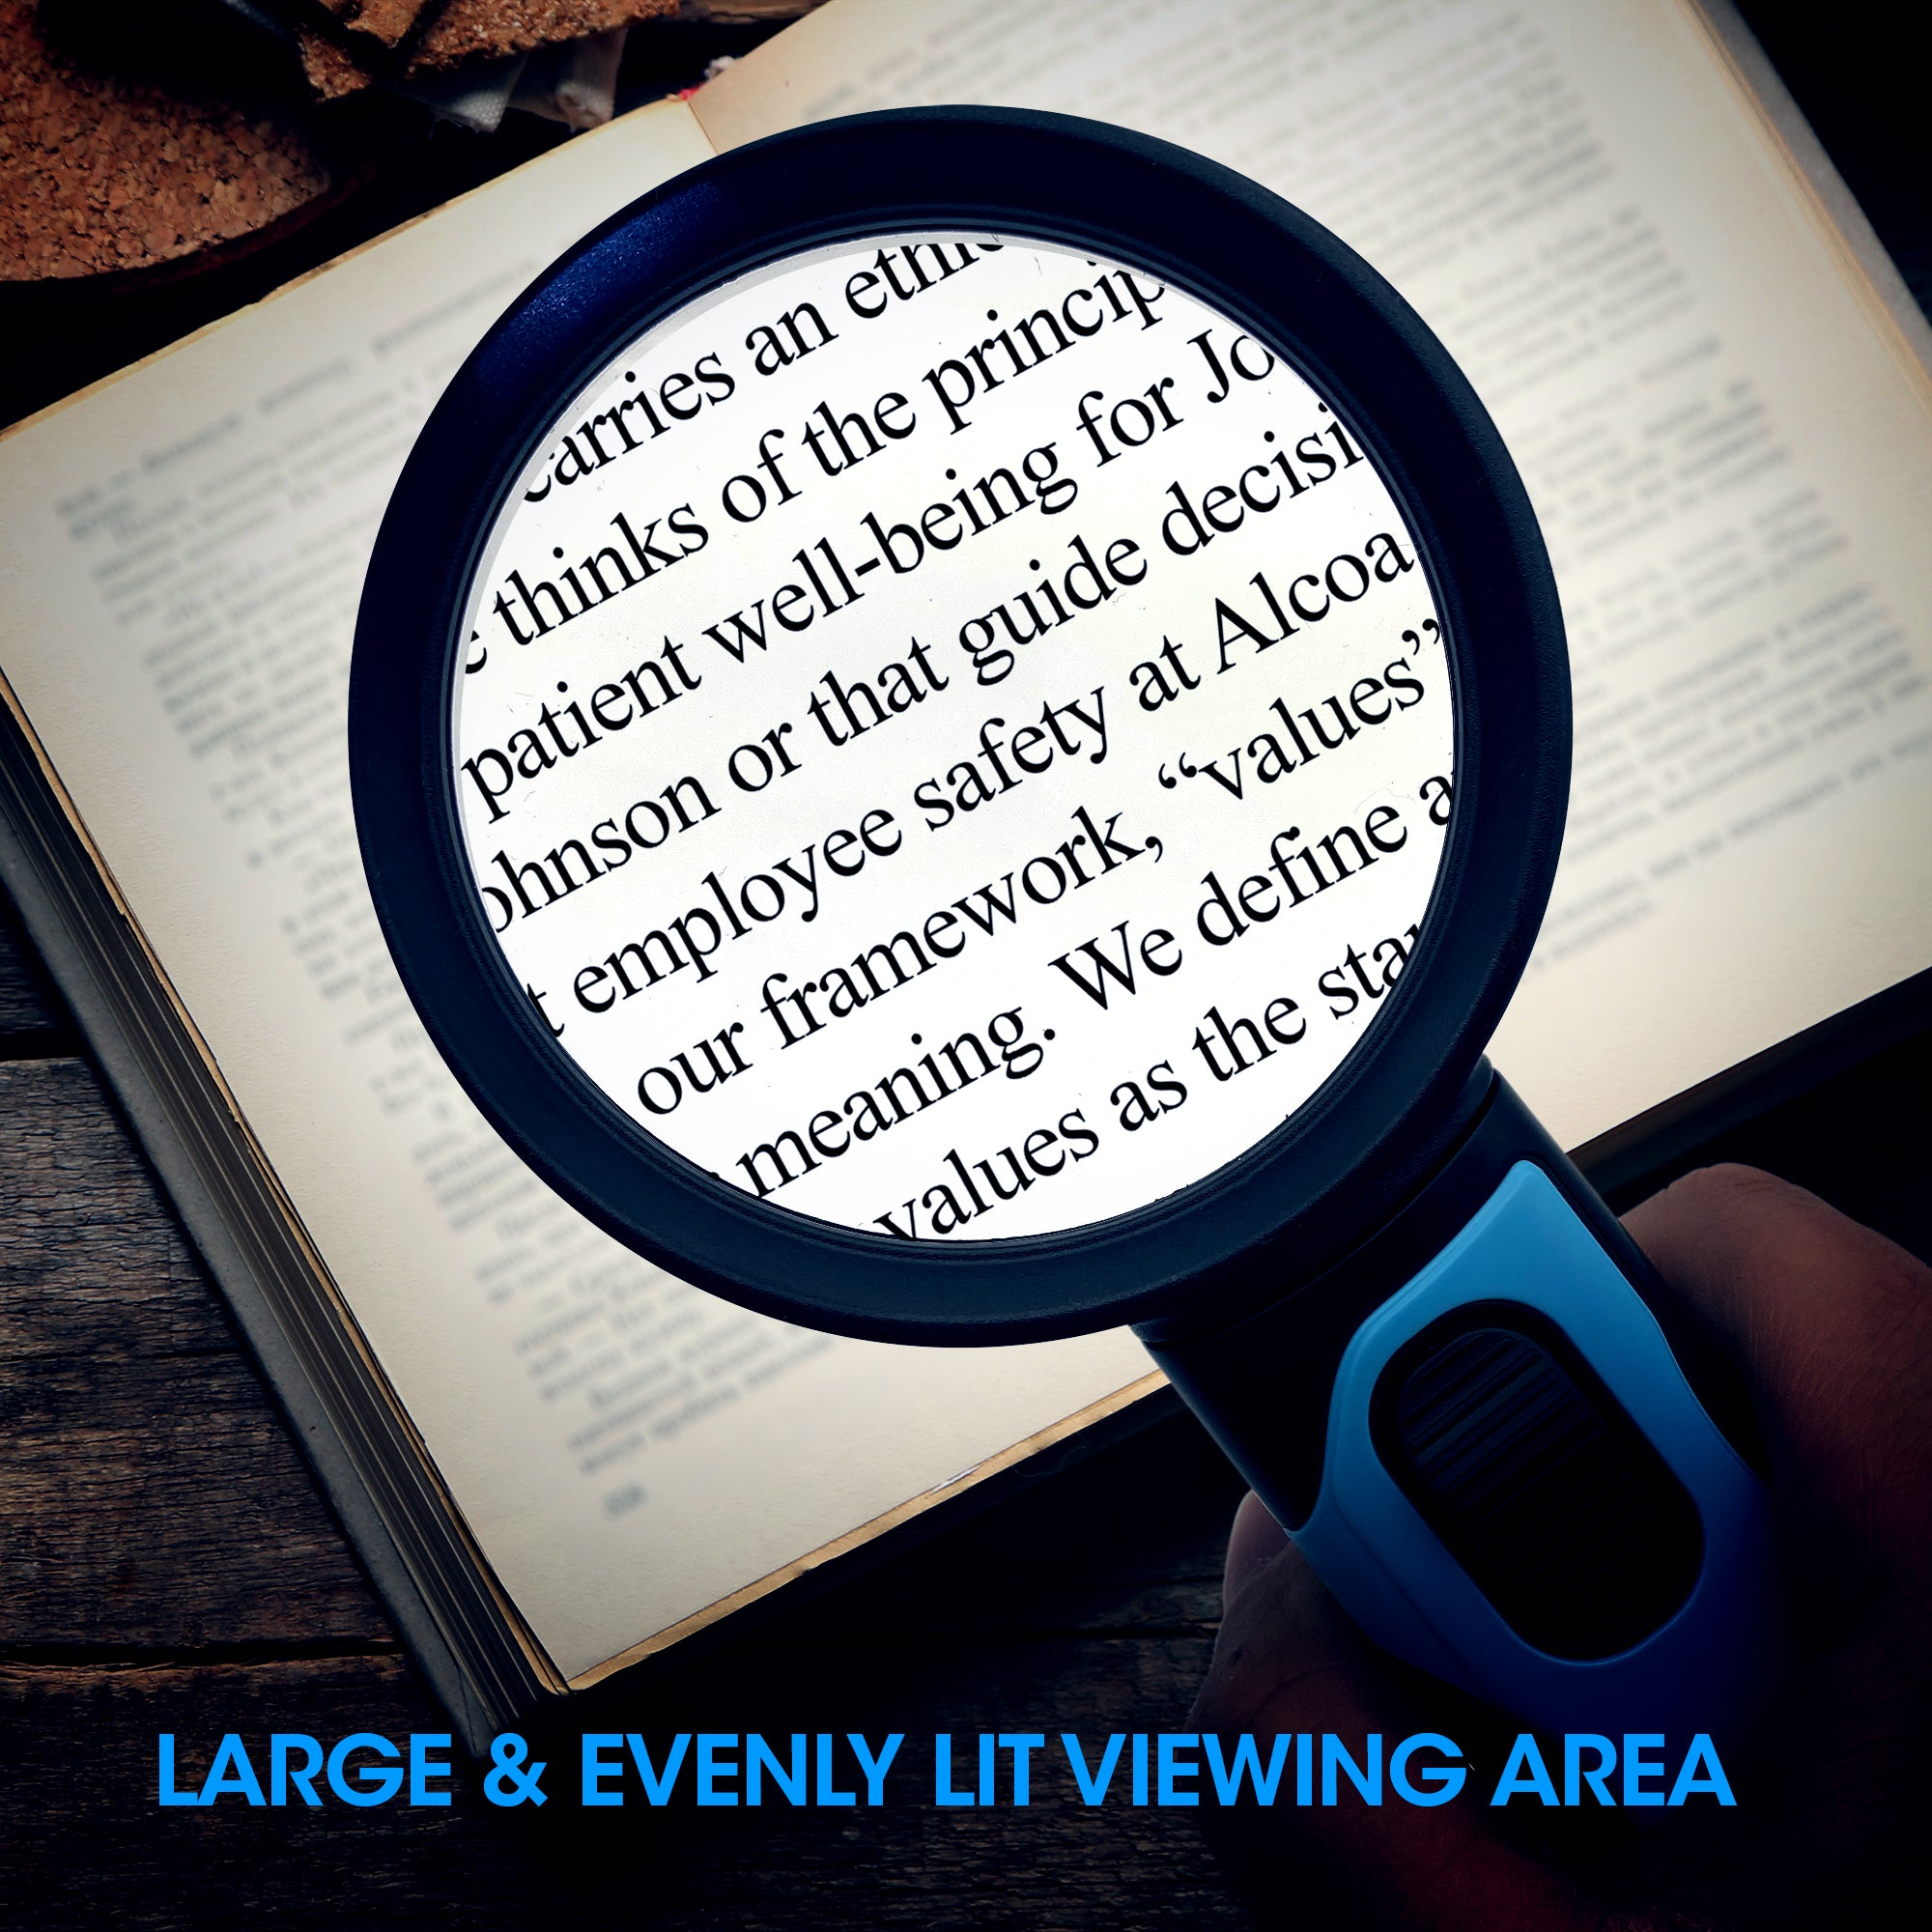 Magnifying Glass with Bright LED Lights- 2.5X, 5X, 16X Handheld Magnifying  Glass with 3 Interchangeable Lenses